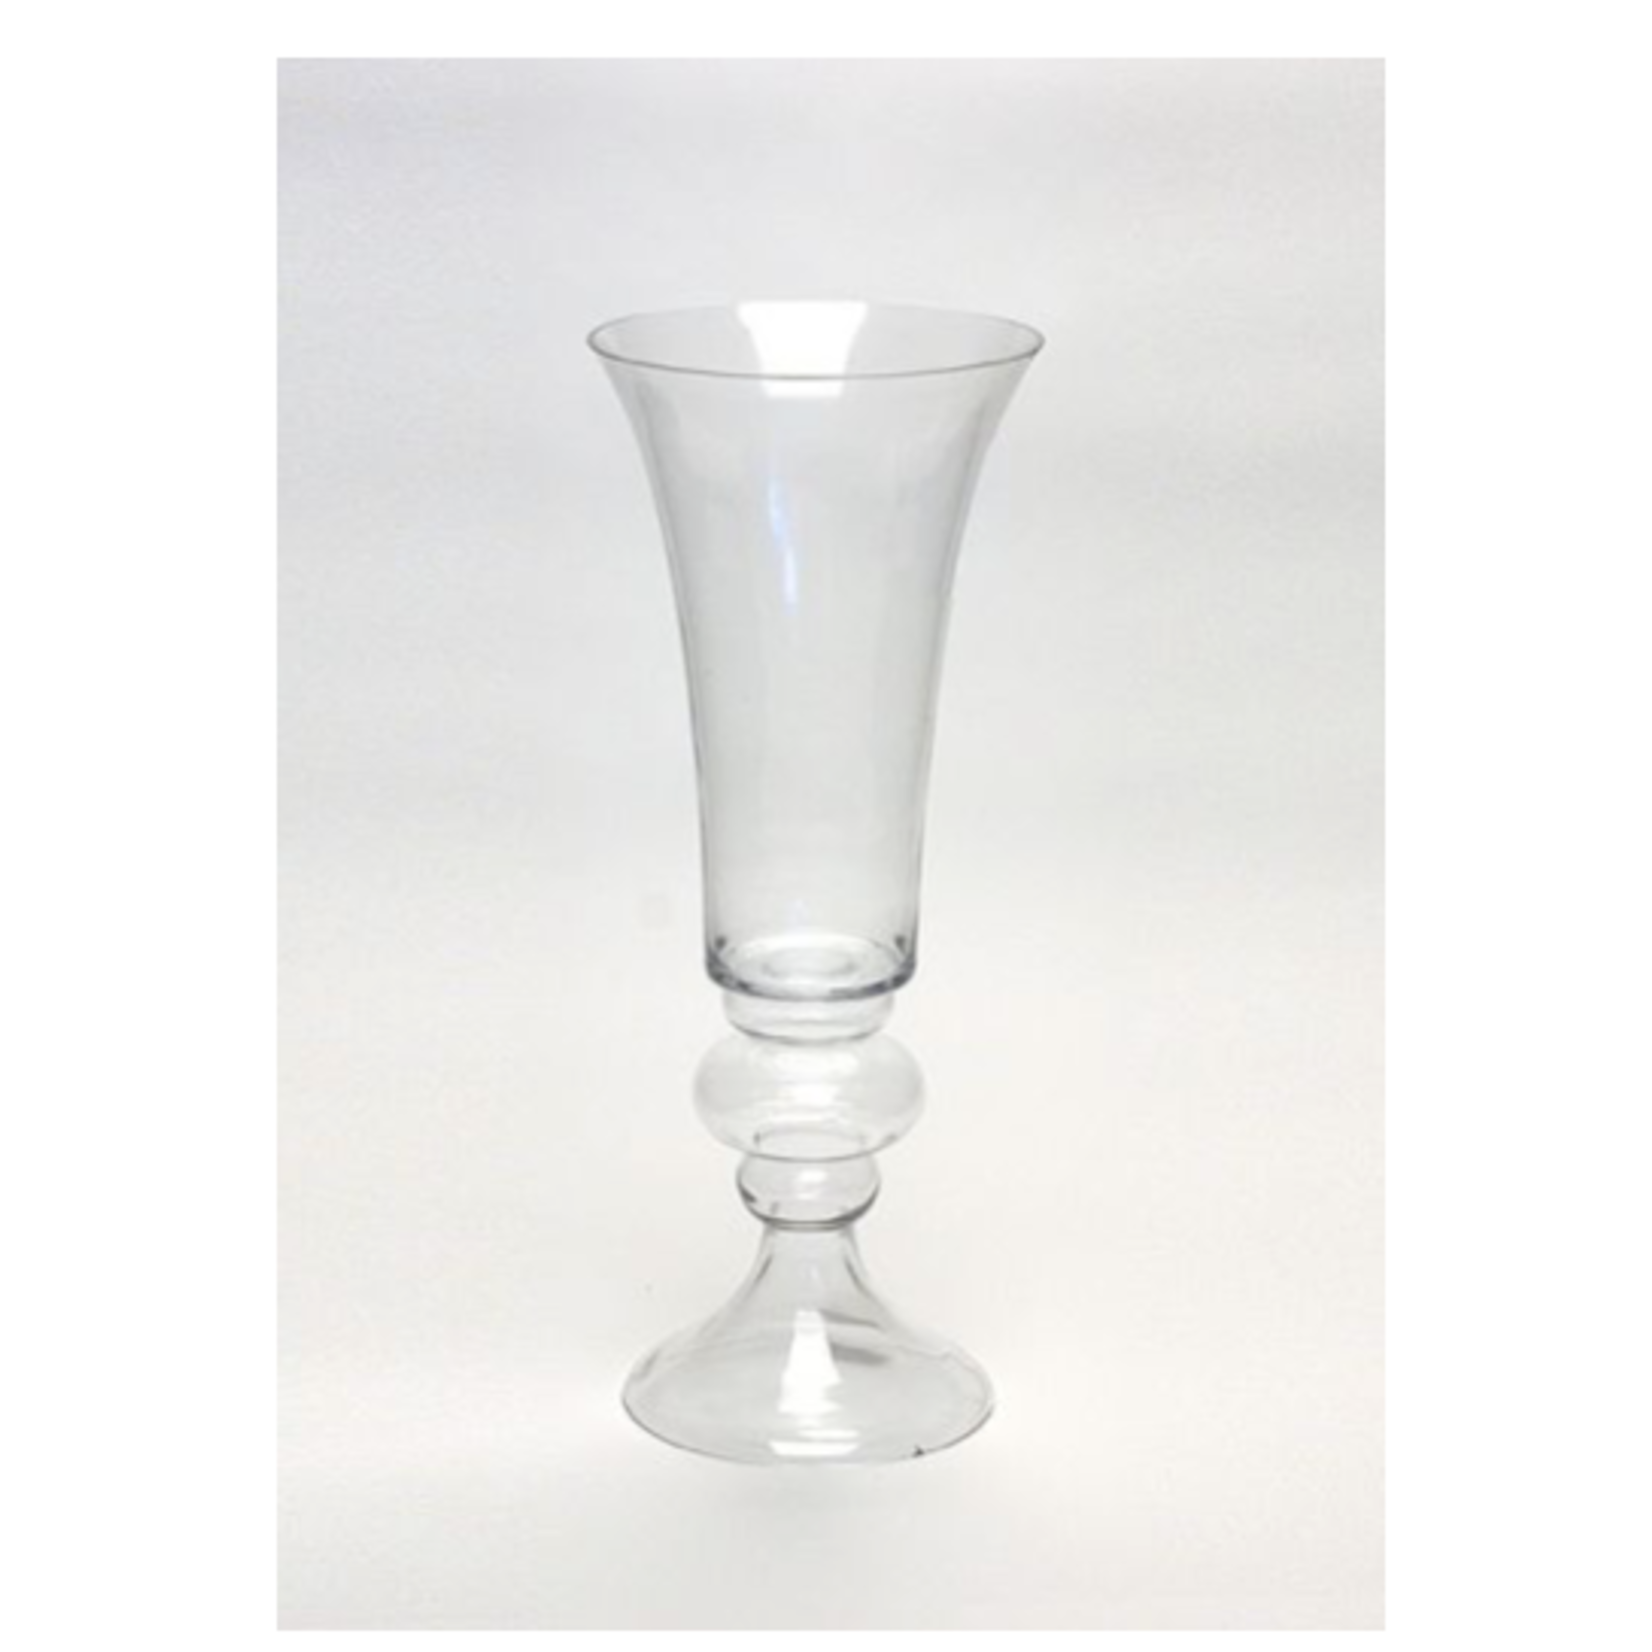 50% off was $90 now $45. 21.75”H X 10” CLEAR GLASS REVERSIBLE TRUMPET VASE